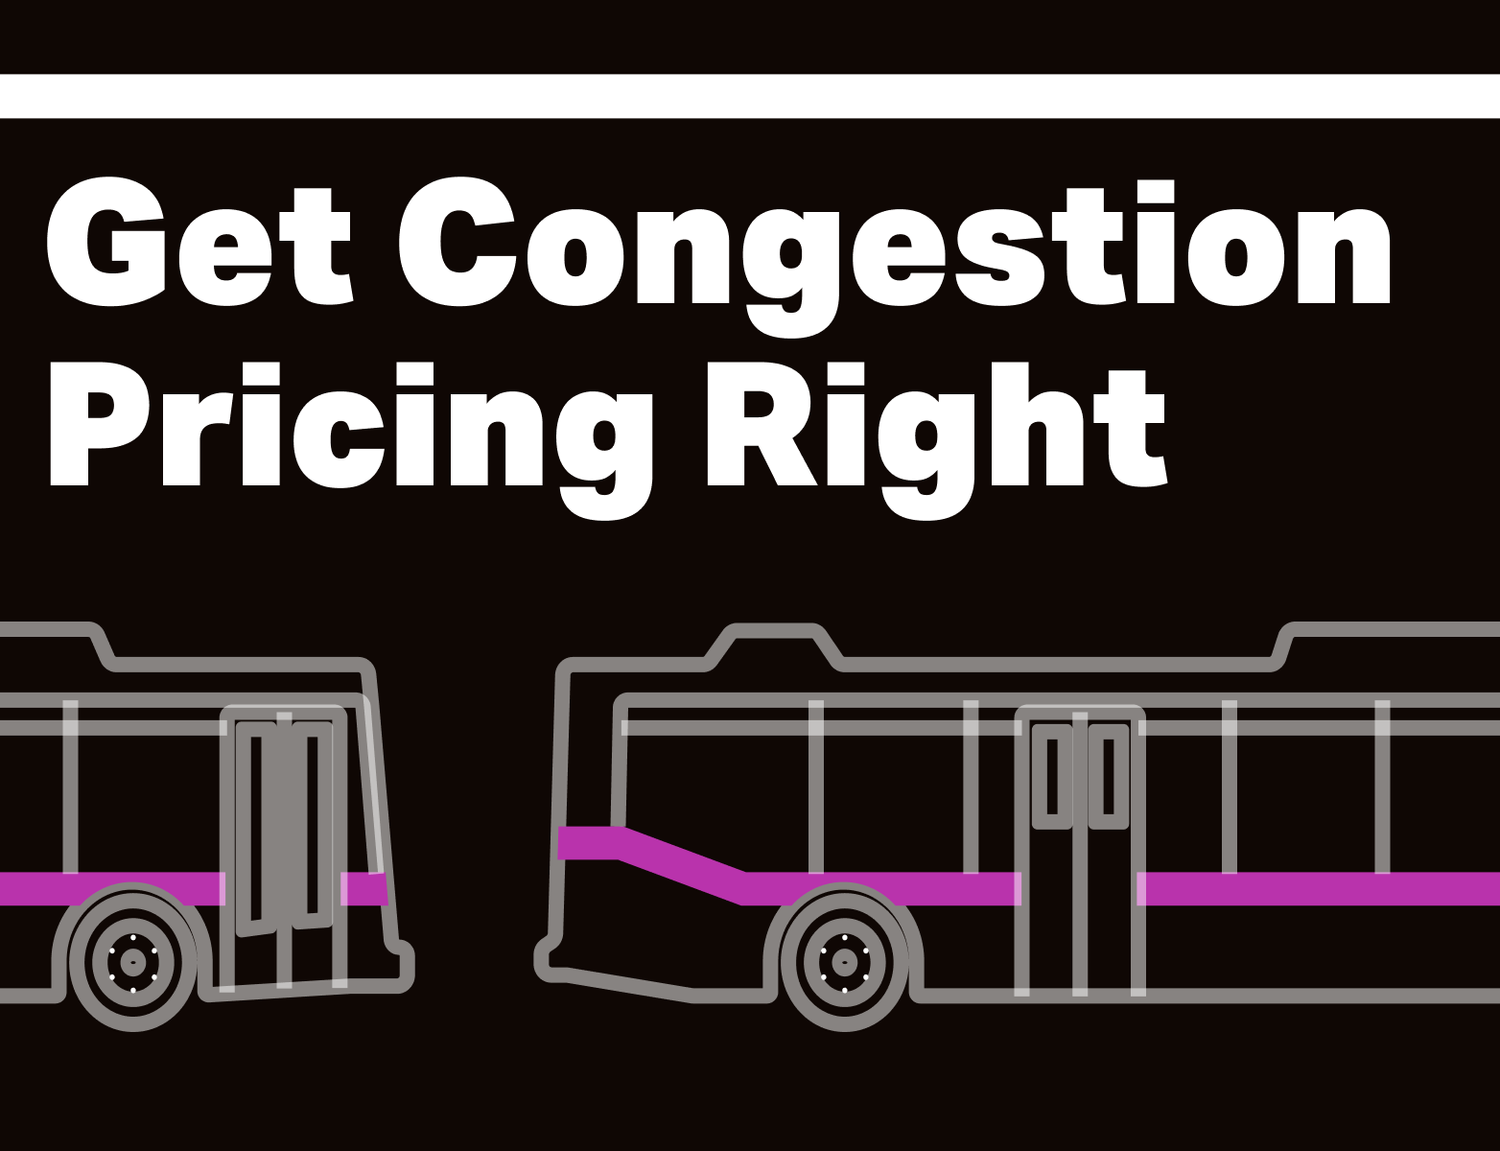 Get Congestion Pricing Right